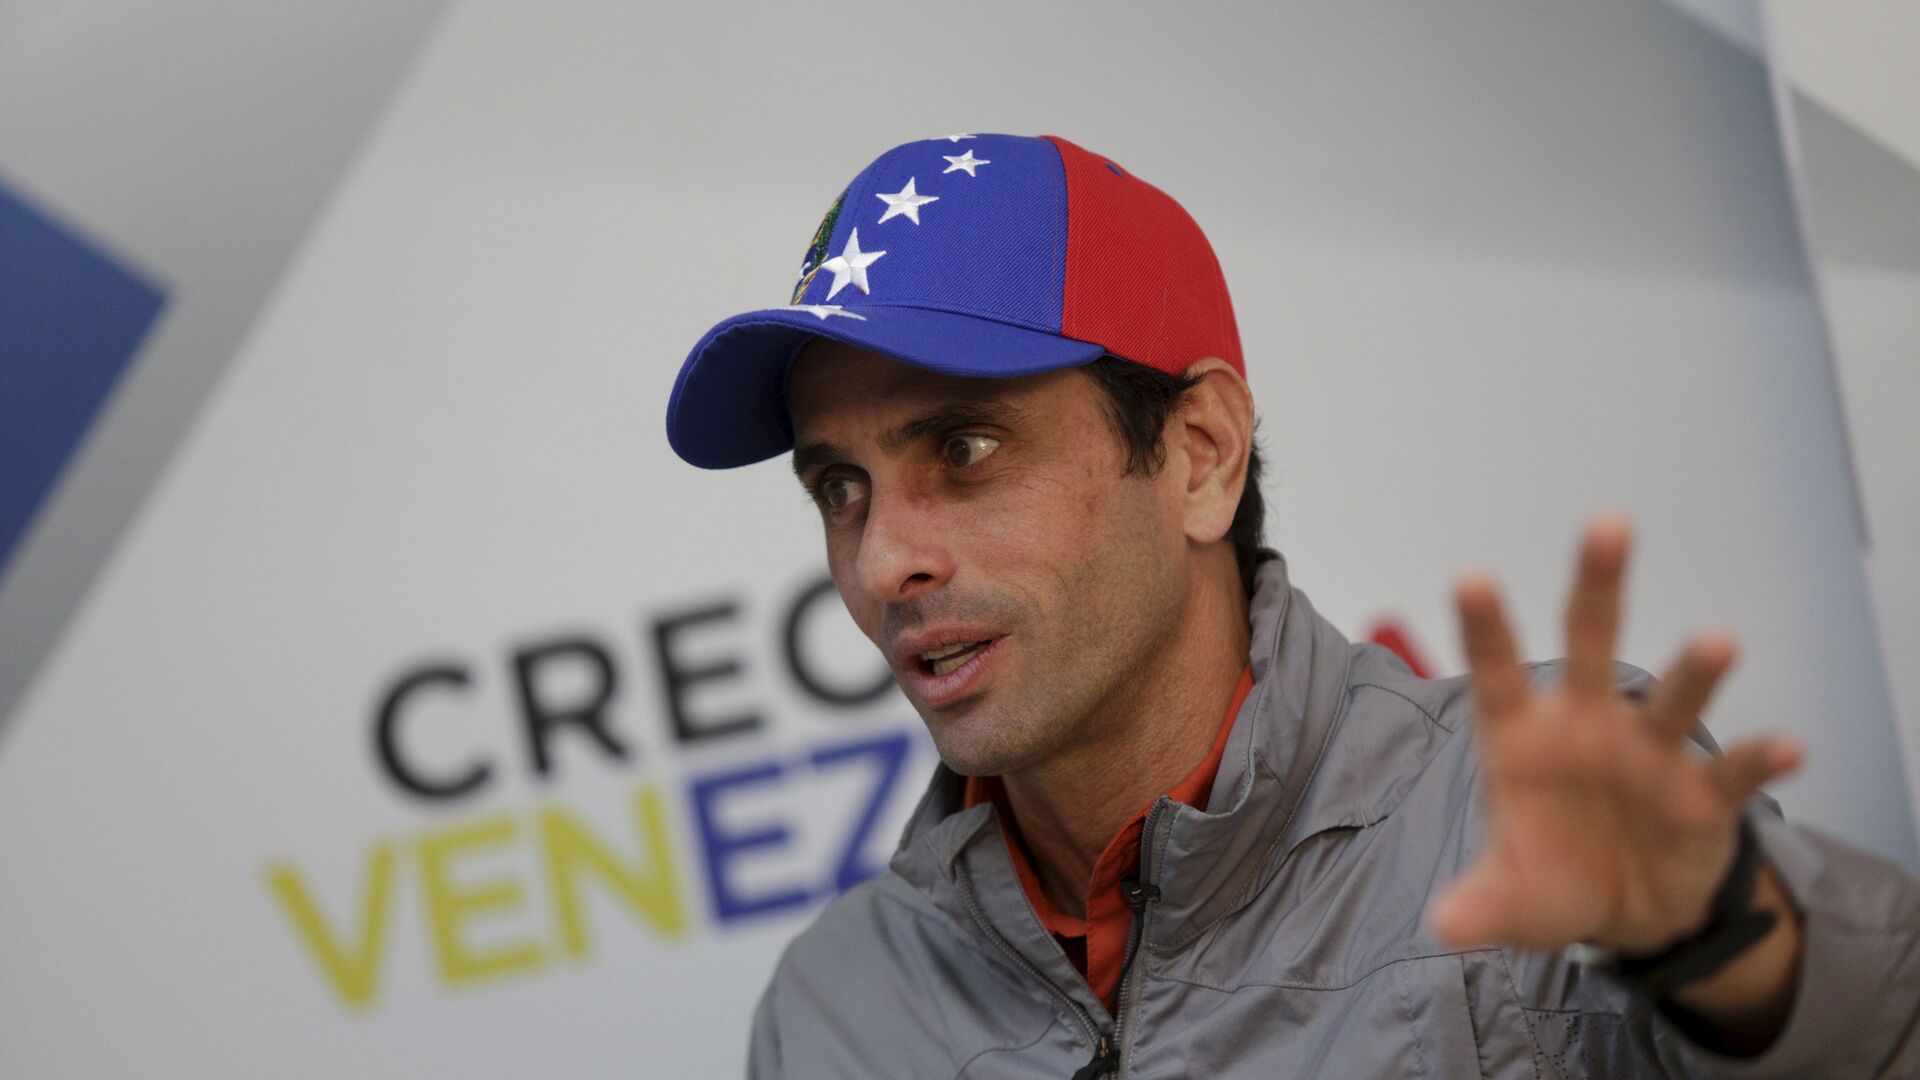 Venezuelan opposition leader and Governor of Miranda state Henrique Capriles speaks during an interview with Reuters in Caracas - Sputnik Mundo, 1920, 11.08.2021